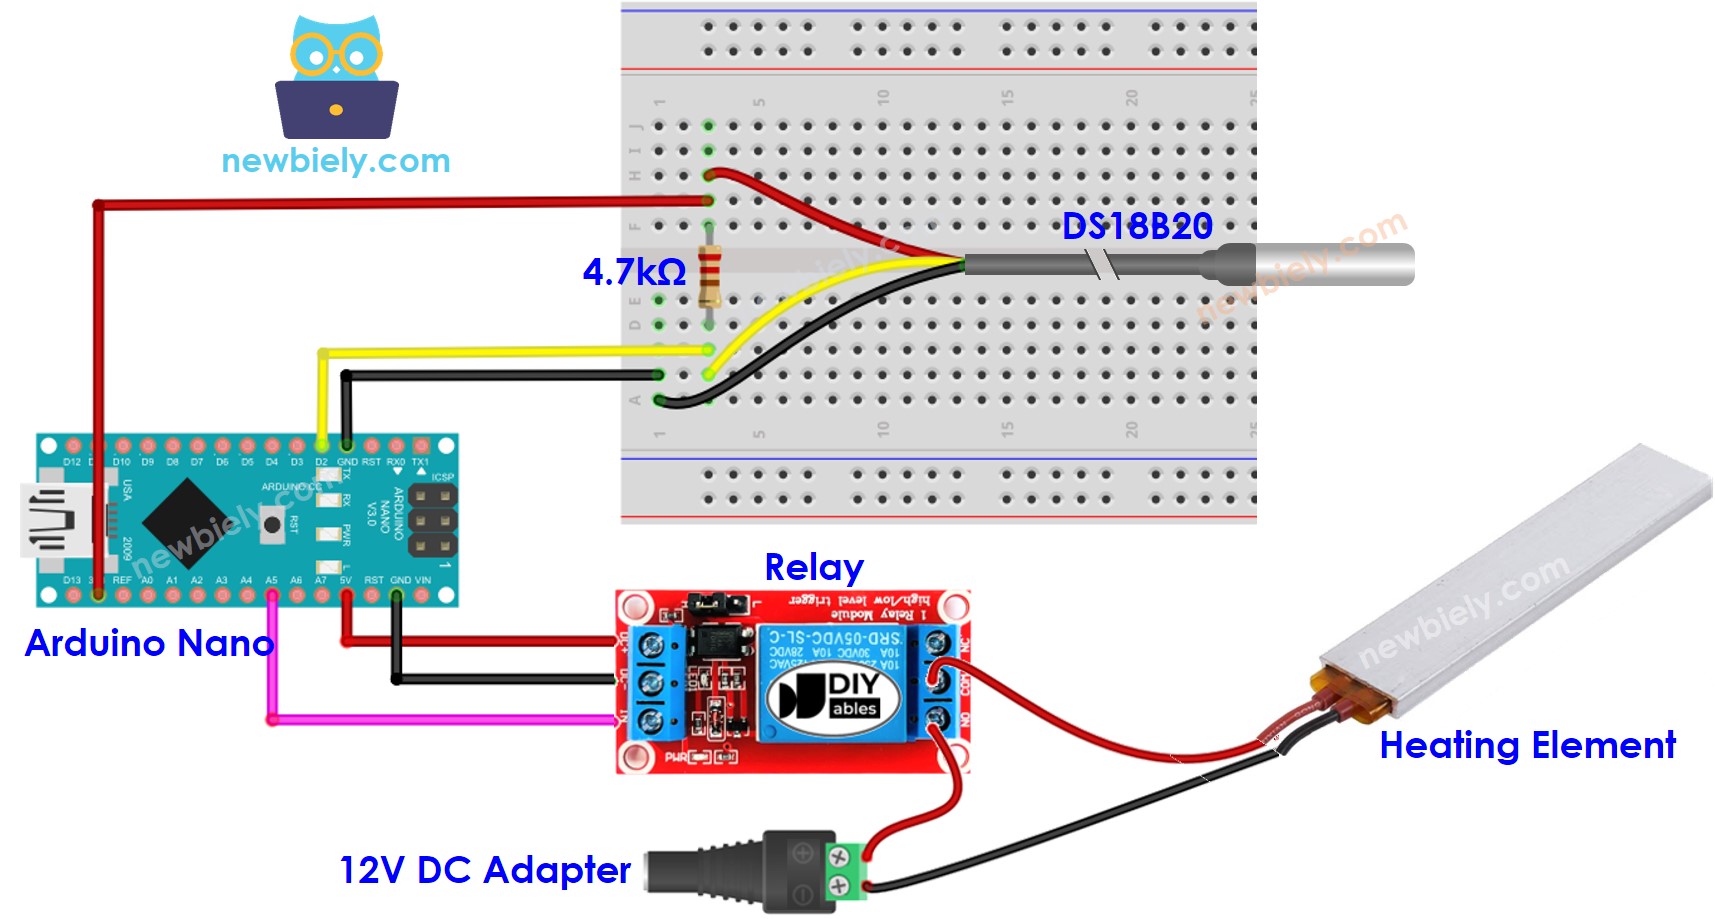 The wiring diagram between Arduino Nano and heating element